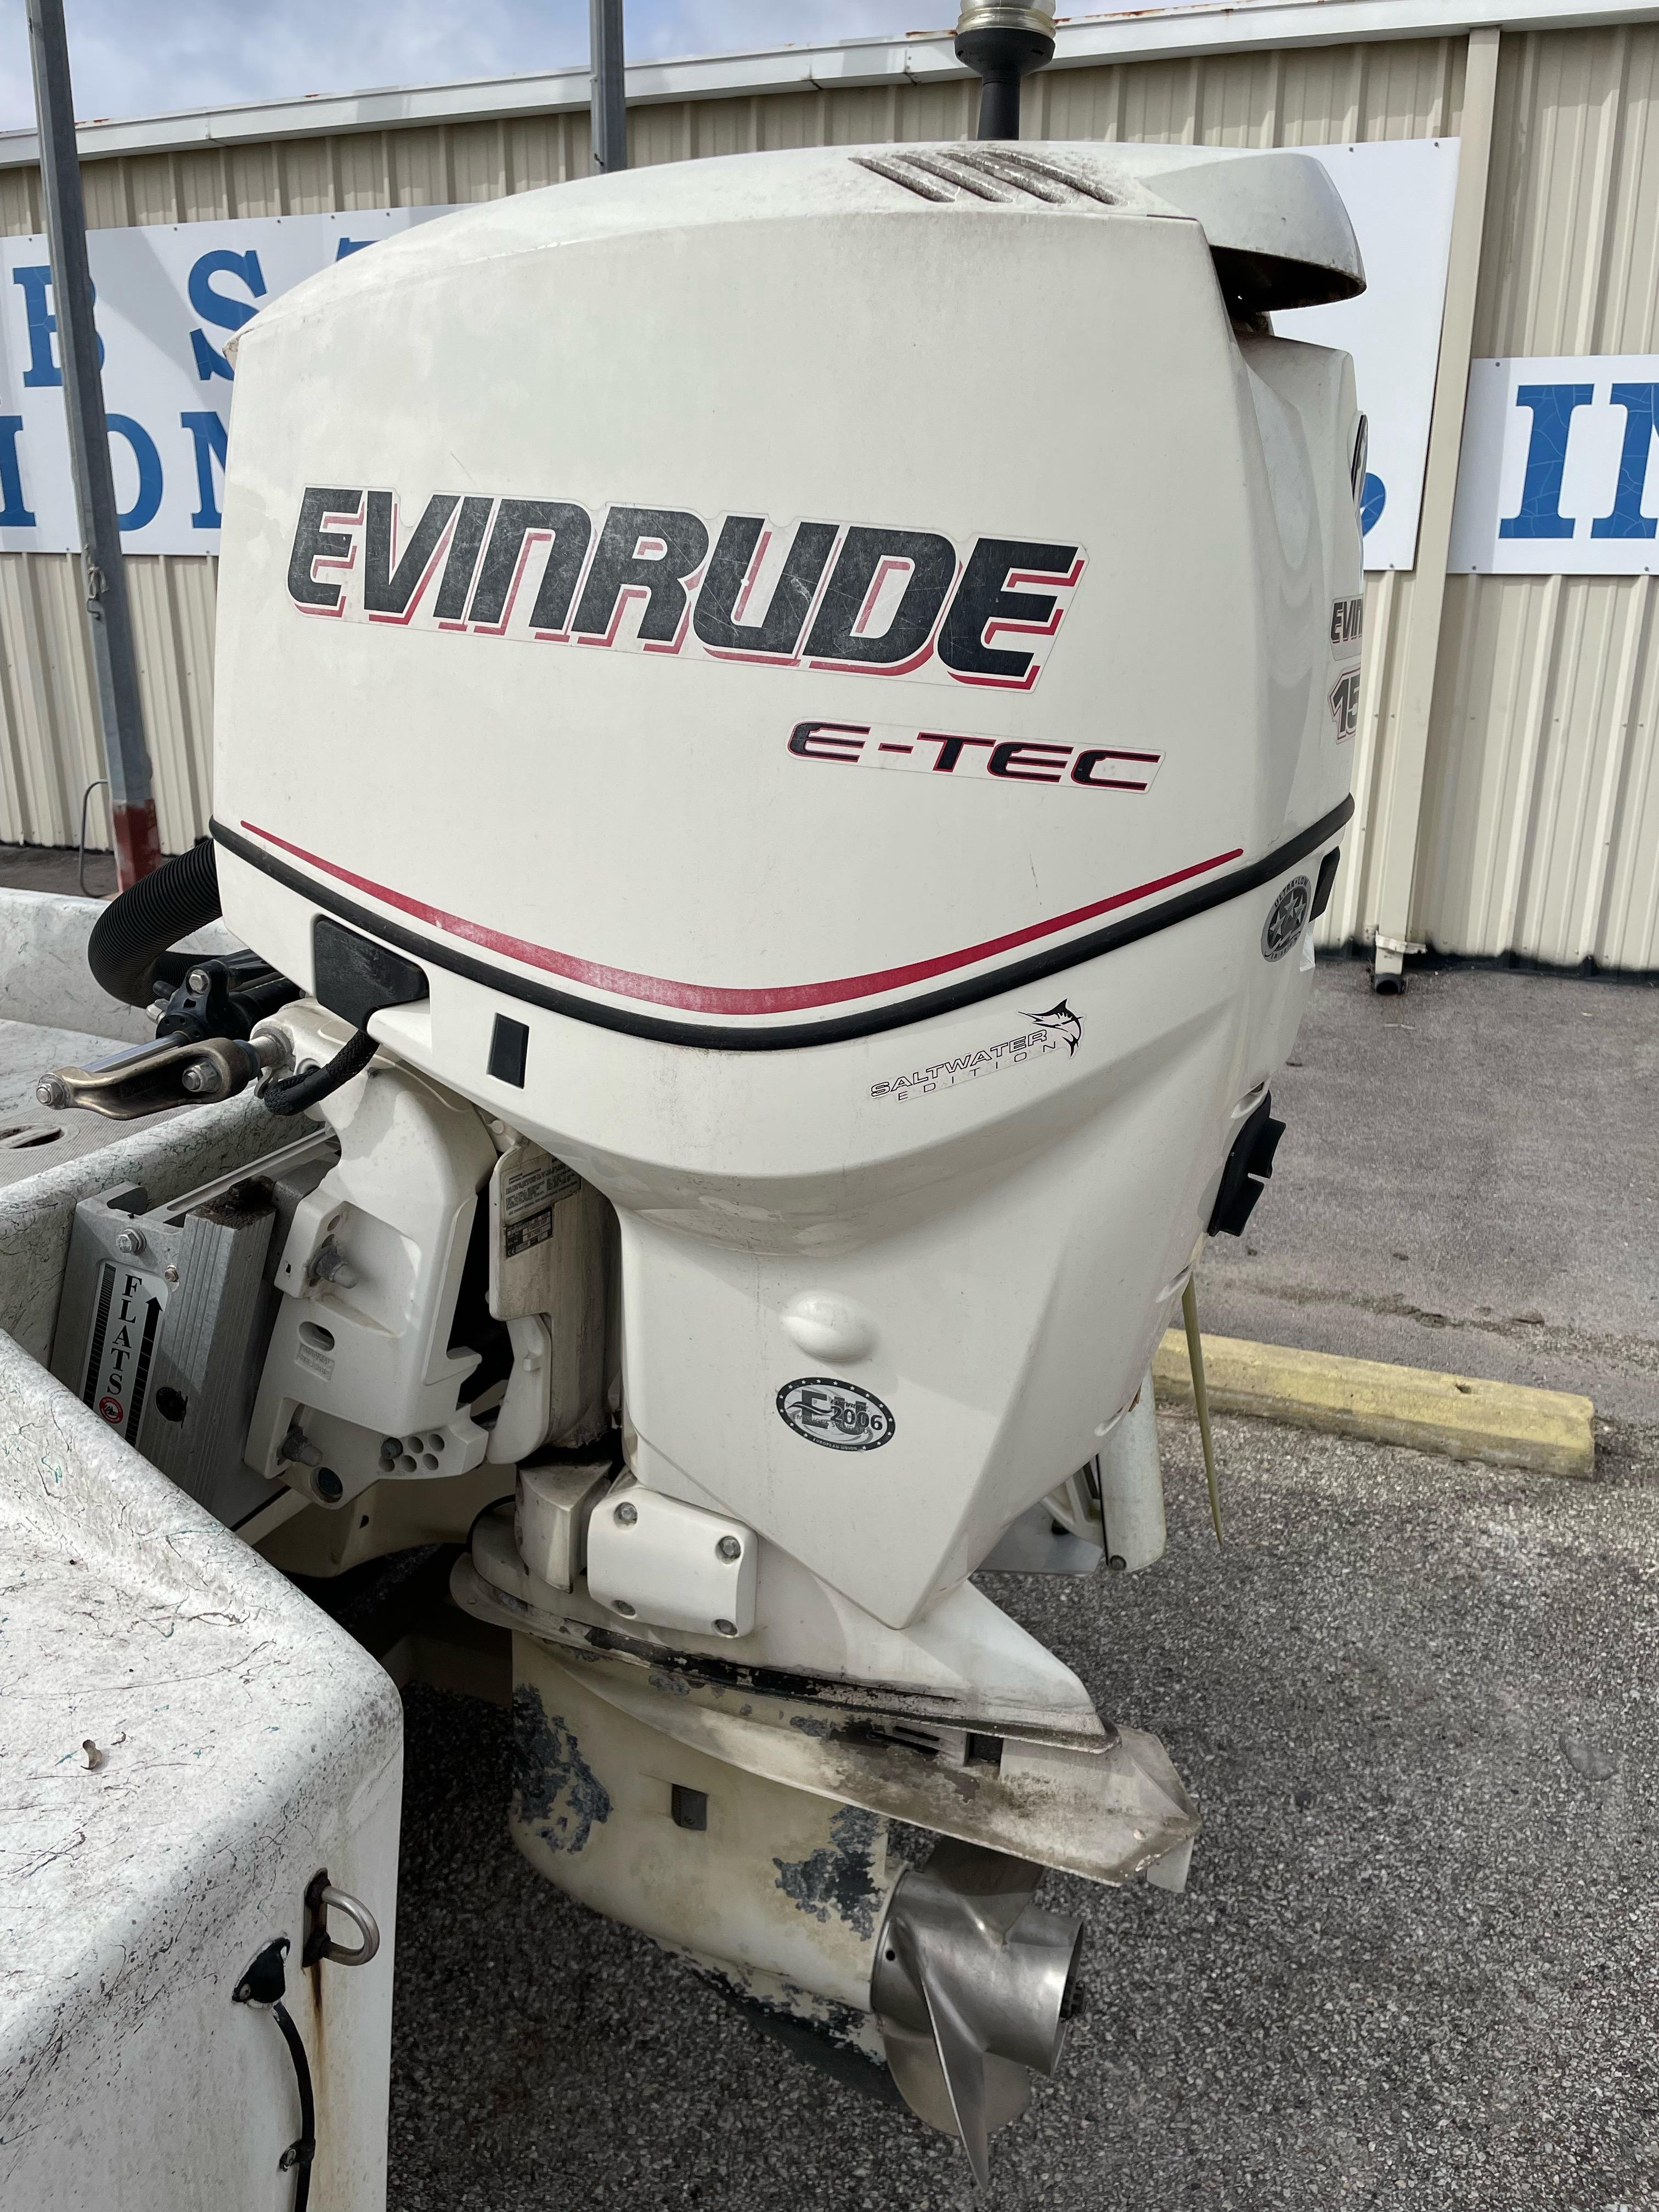 2007 SHOALWATER BOAT WITH 2007 EVINRUDE 150HP MOTOR AND 2007 COASTAL BOAT TRAILER